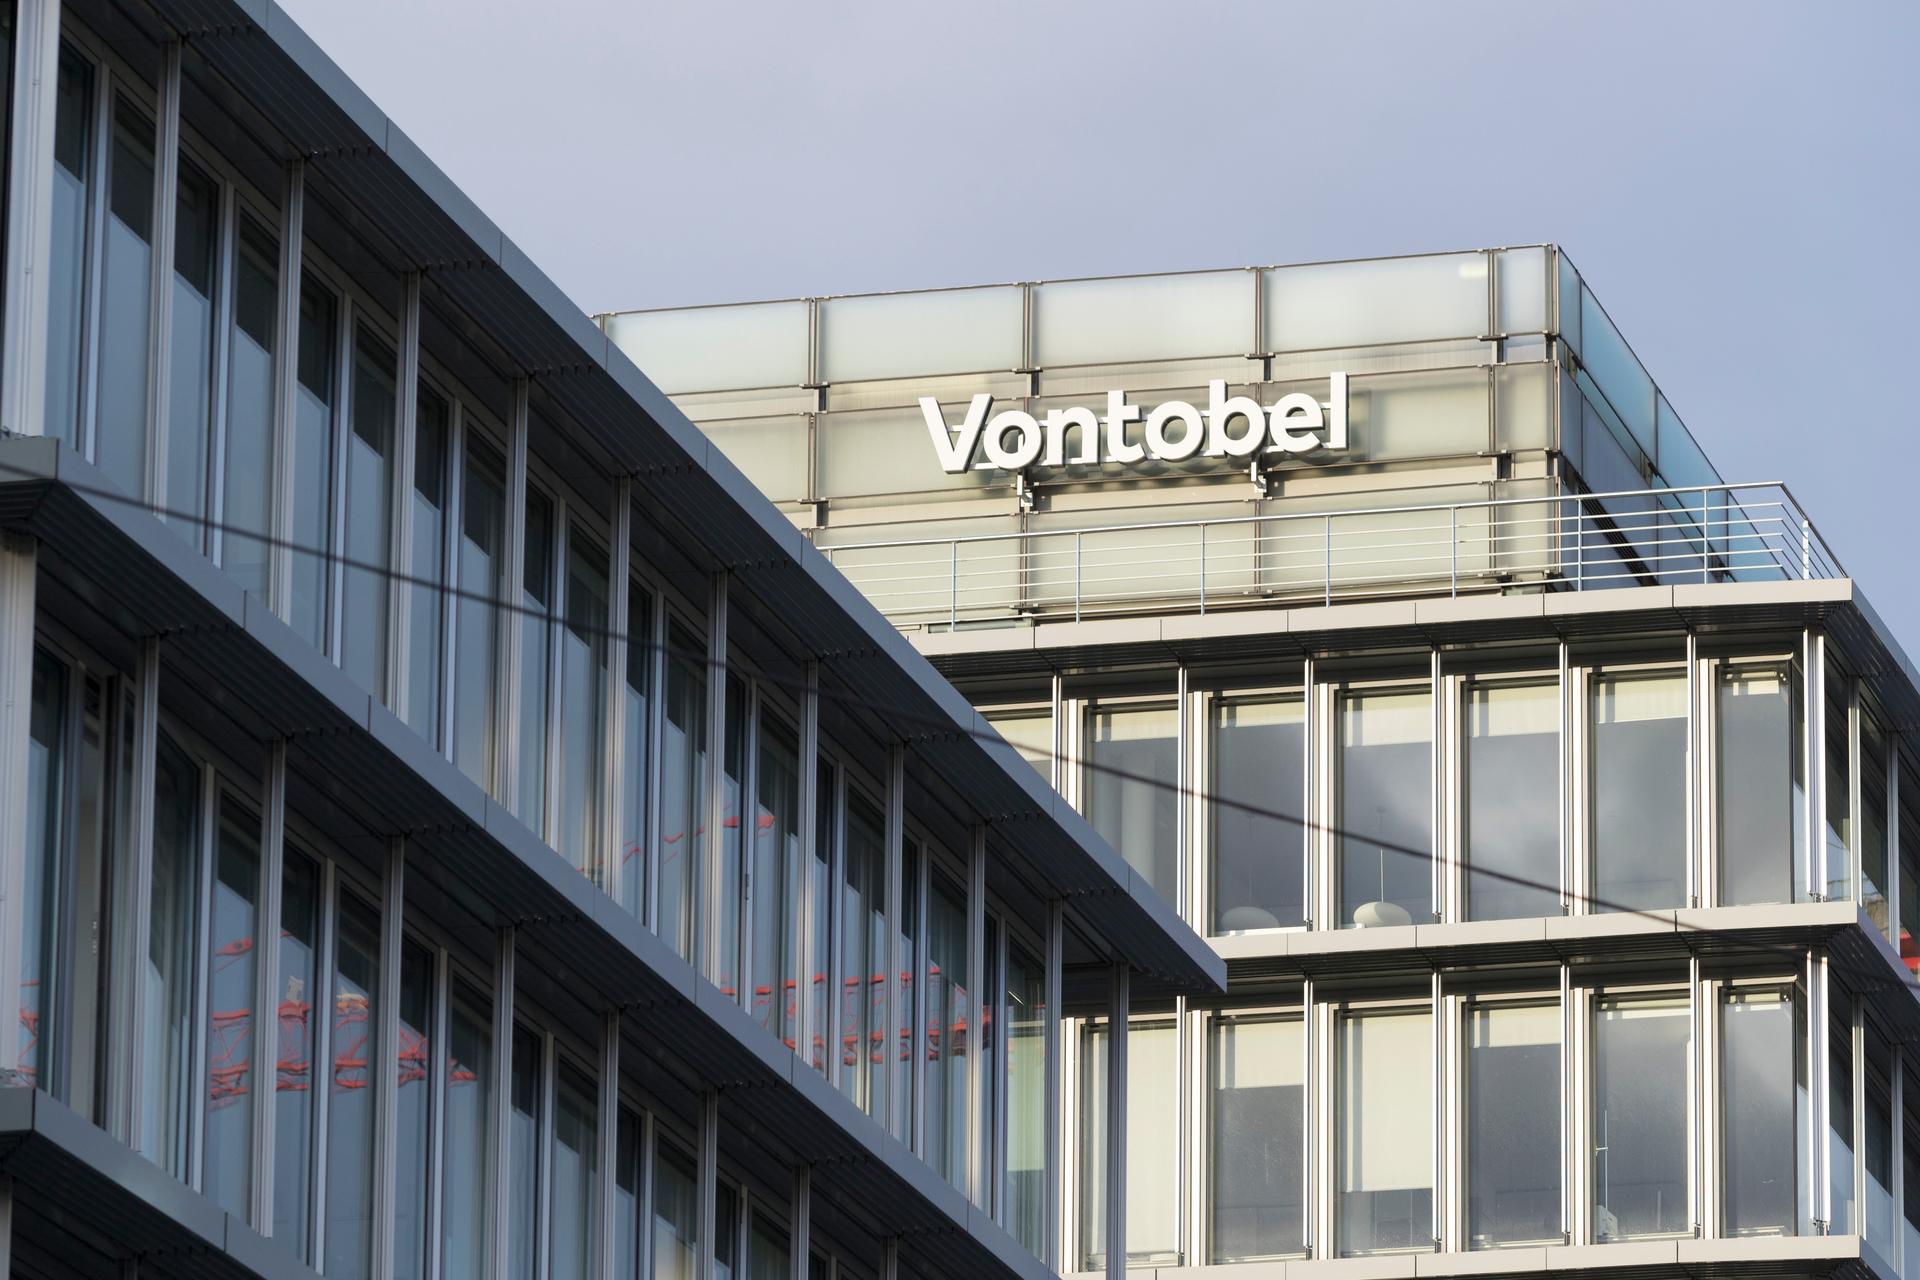 The headquarters of Bank Vontobel in Zurich, Switzerland, photographed from the outside.